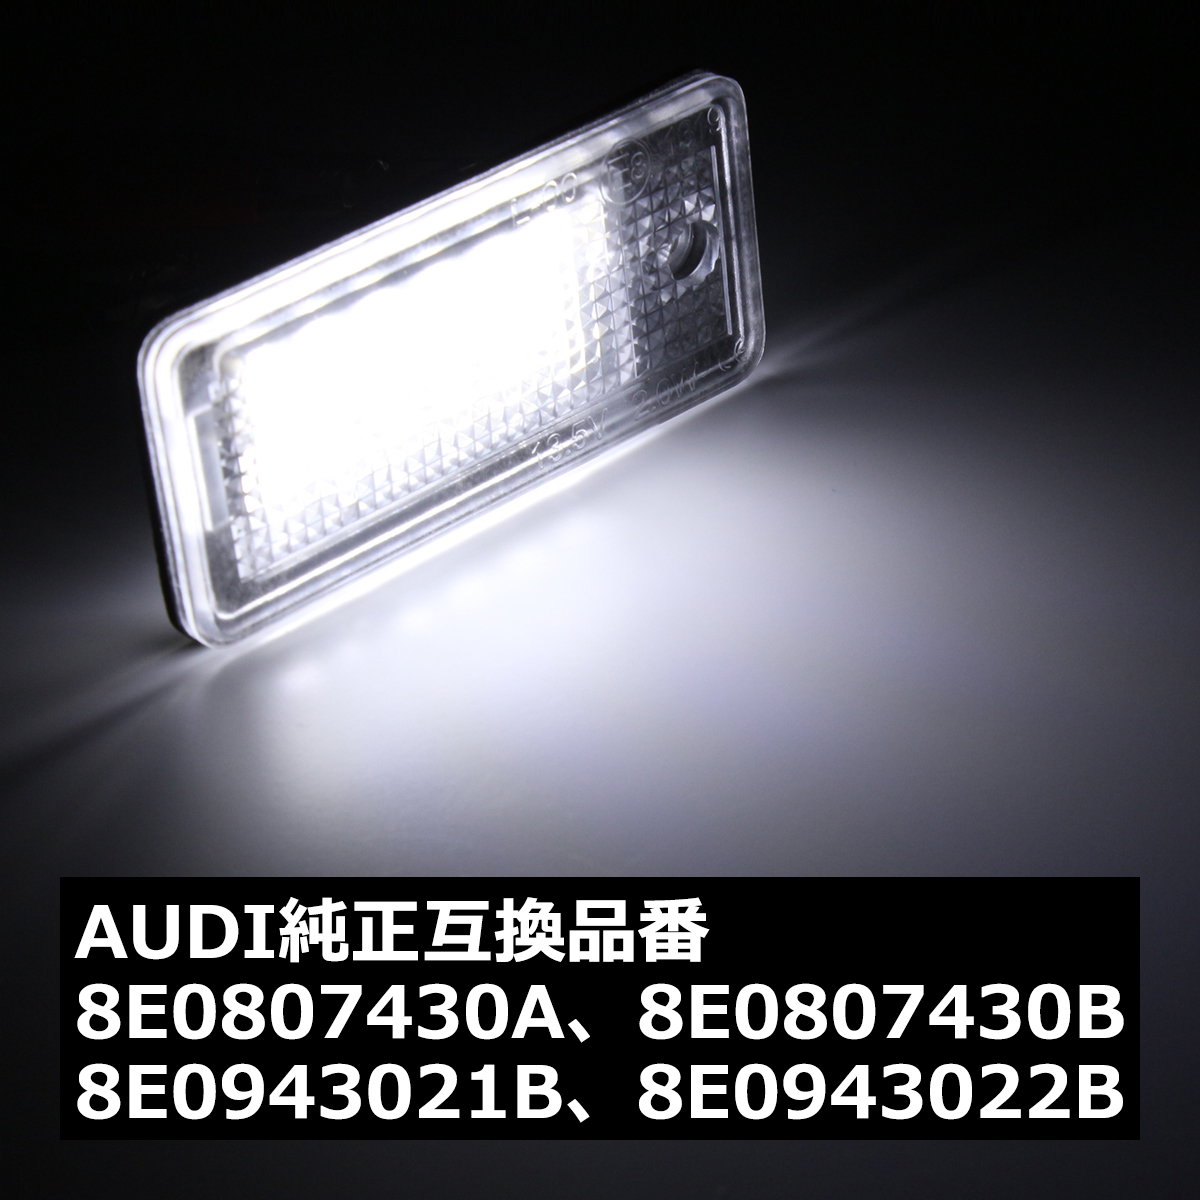 LEDライセンスランプ アウディ A3/S3/A4/S4/A5/S5/A6/S6/RS6/A8/S8/Q7 車種専用設計 ナンバー灯 2個セット RZ149｜tech｜04